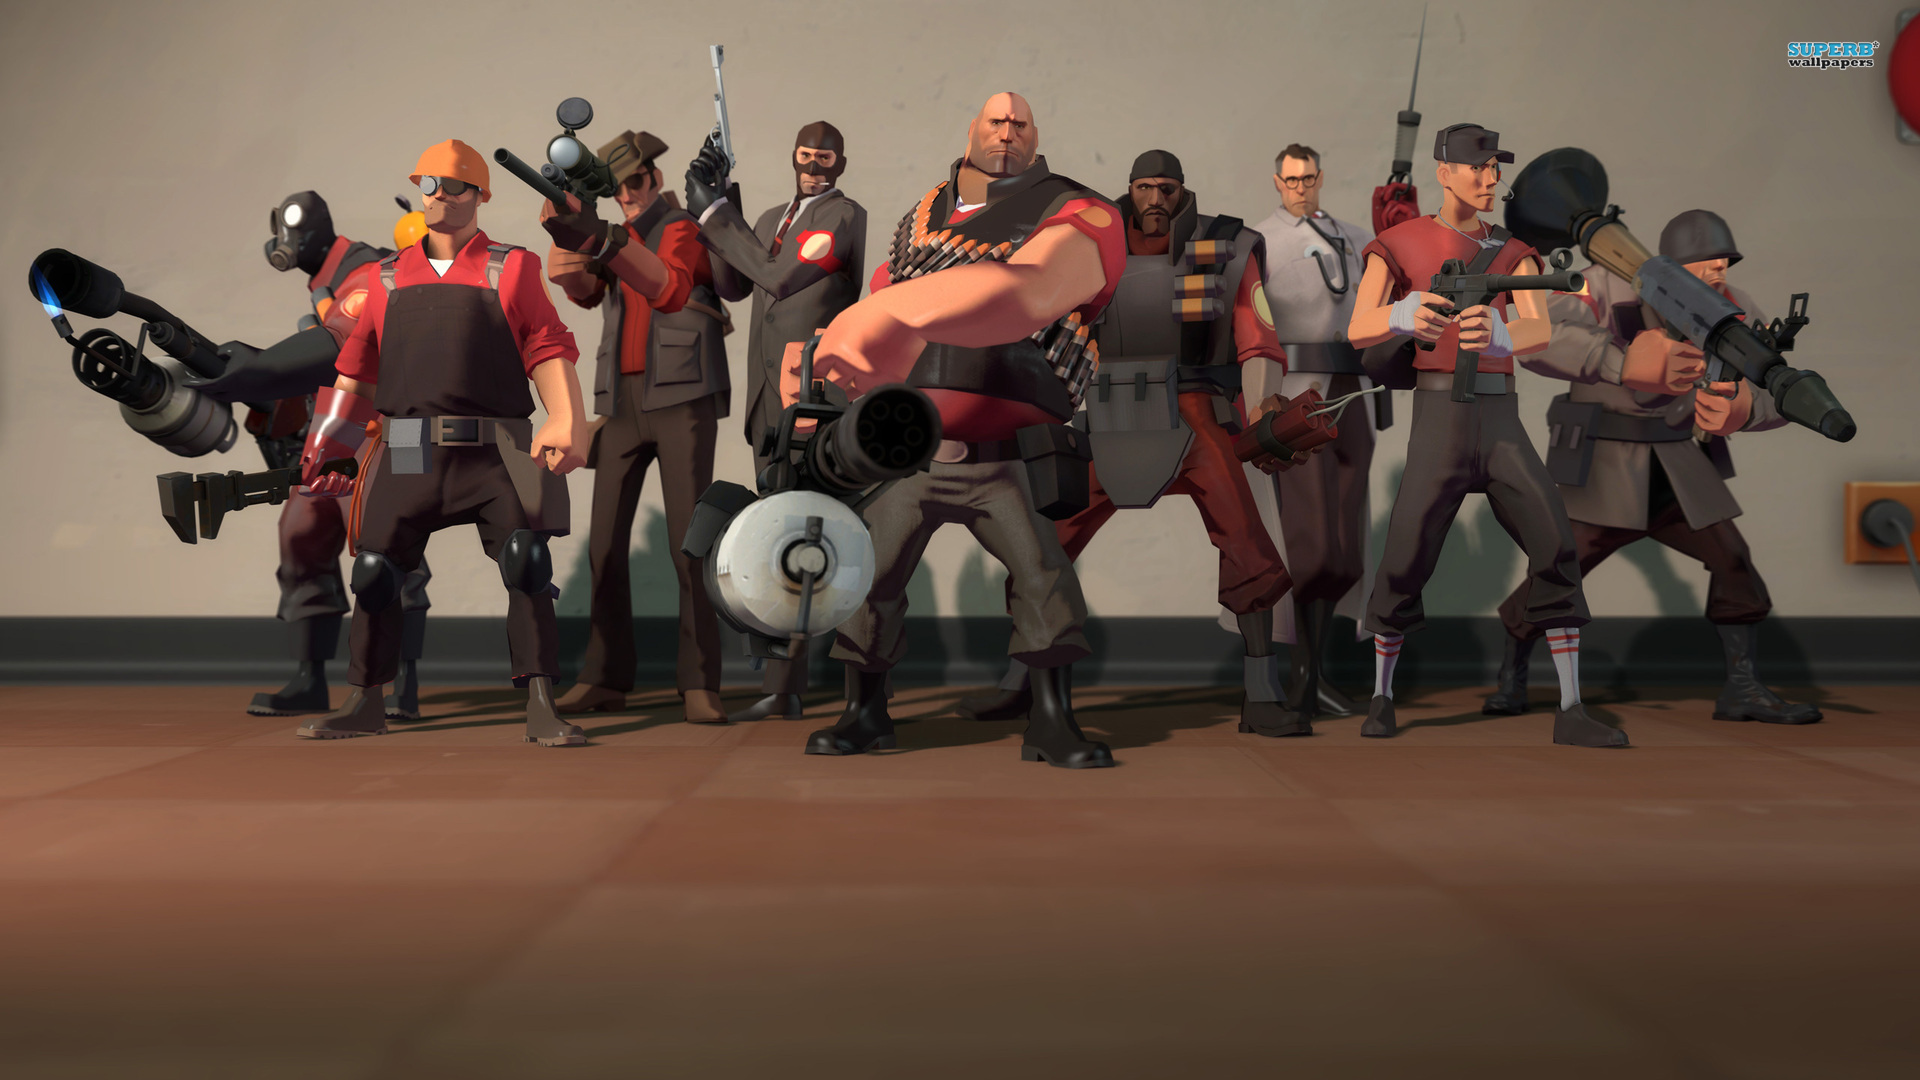 Team fortress 2, free to play games on steam